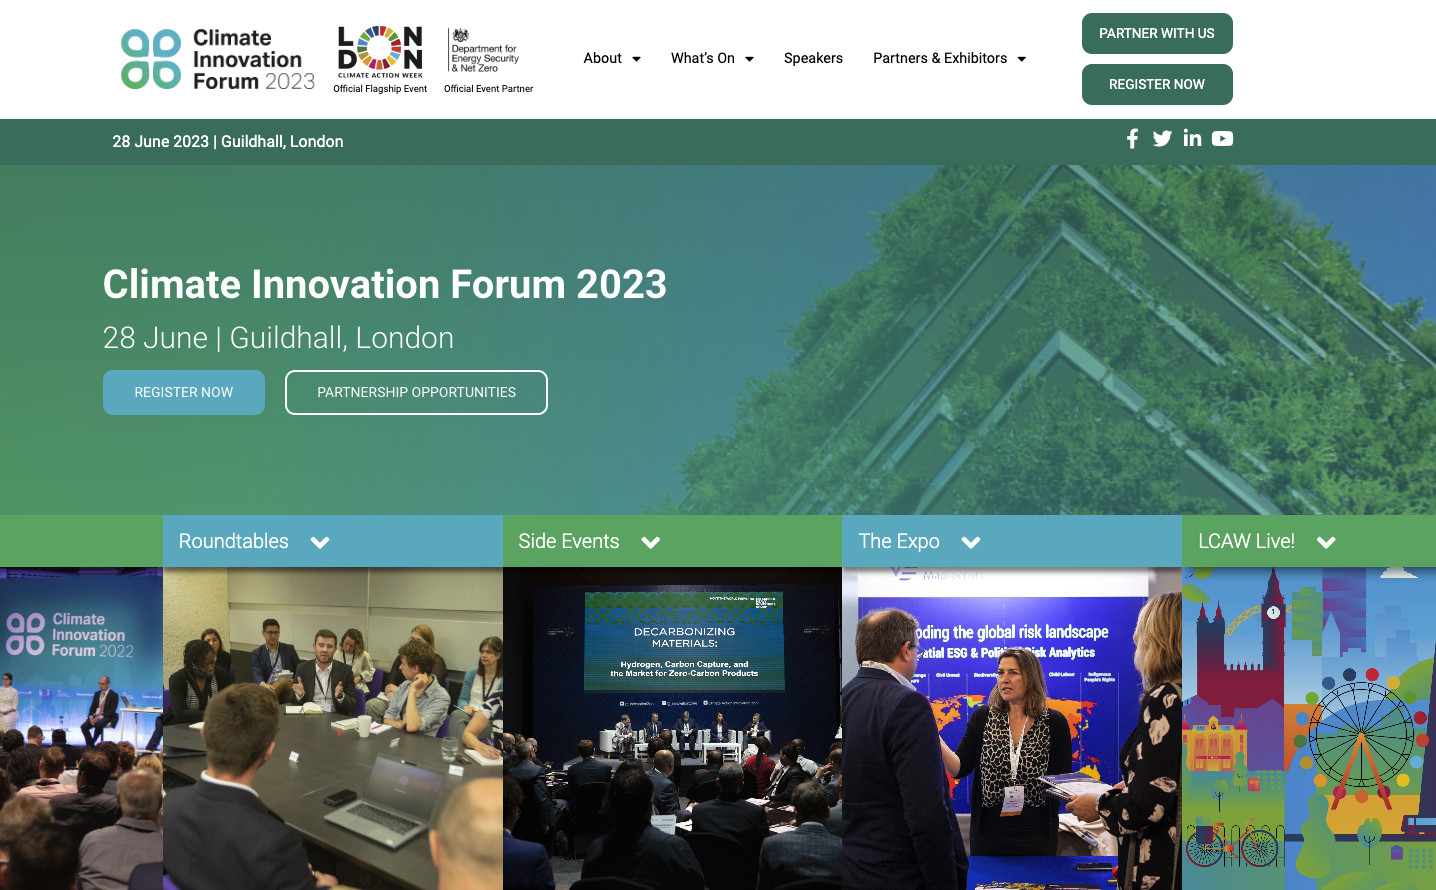 Climate Innovation Forum 2023 website showing event details, sponsors/partners, and London Climate Action Week.